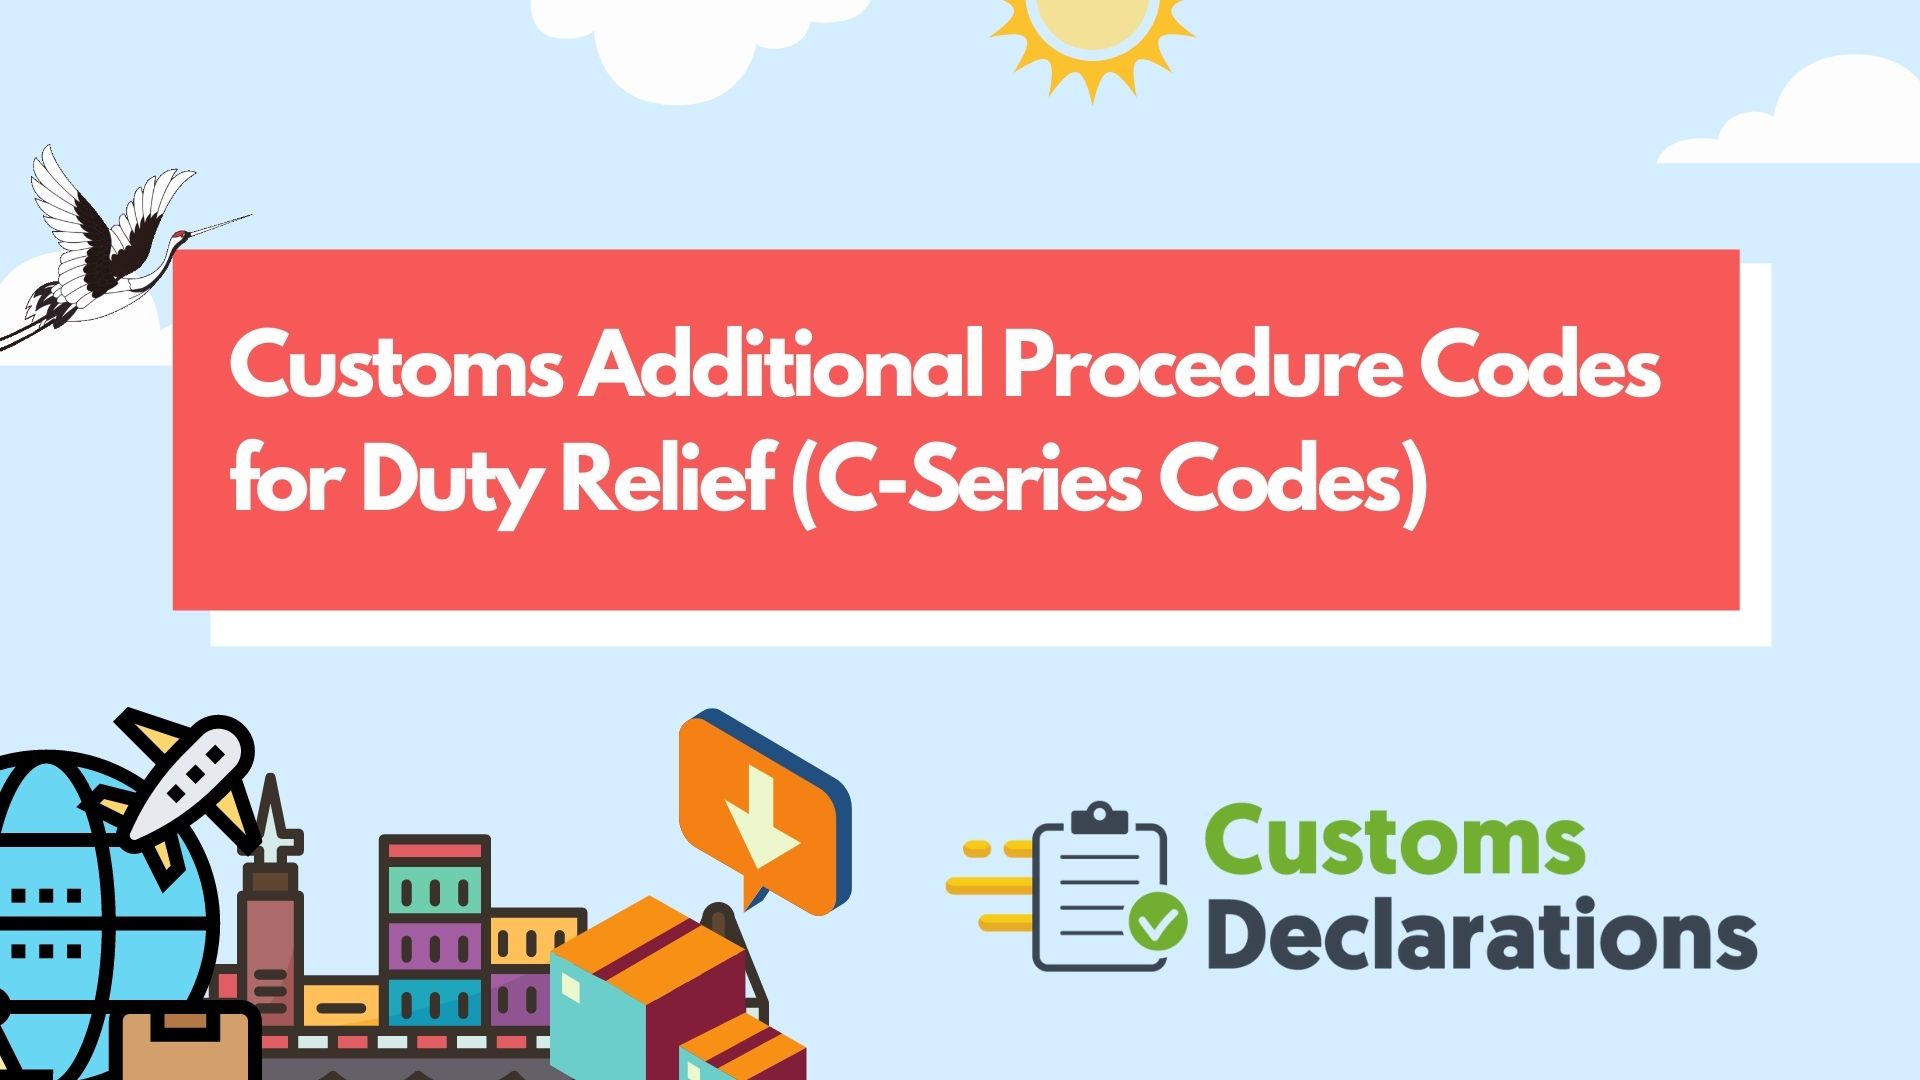 Customs Additional Procedure Codes for Duty Relief (C-Series Codes)